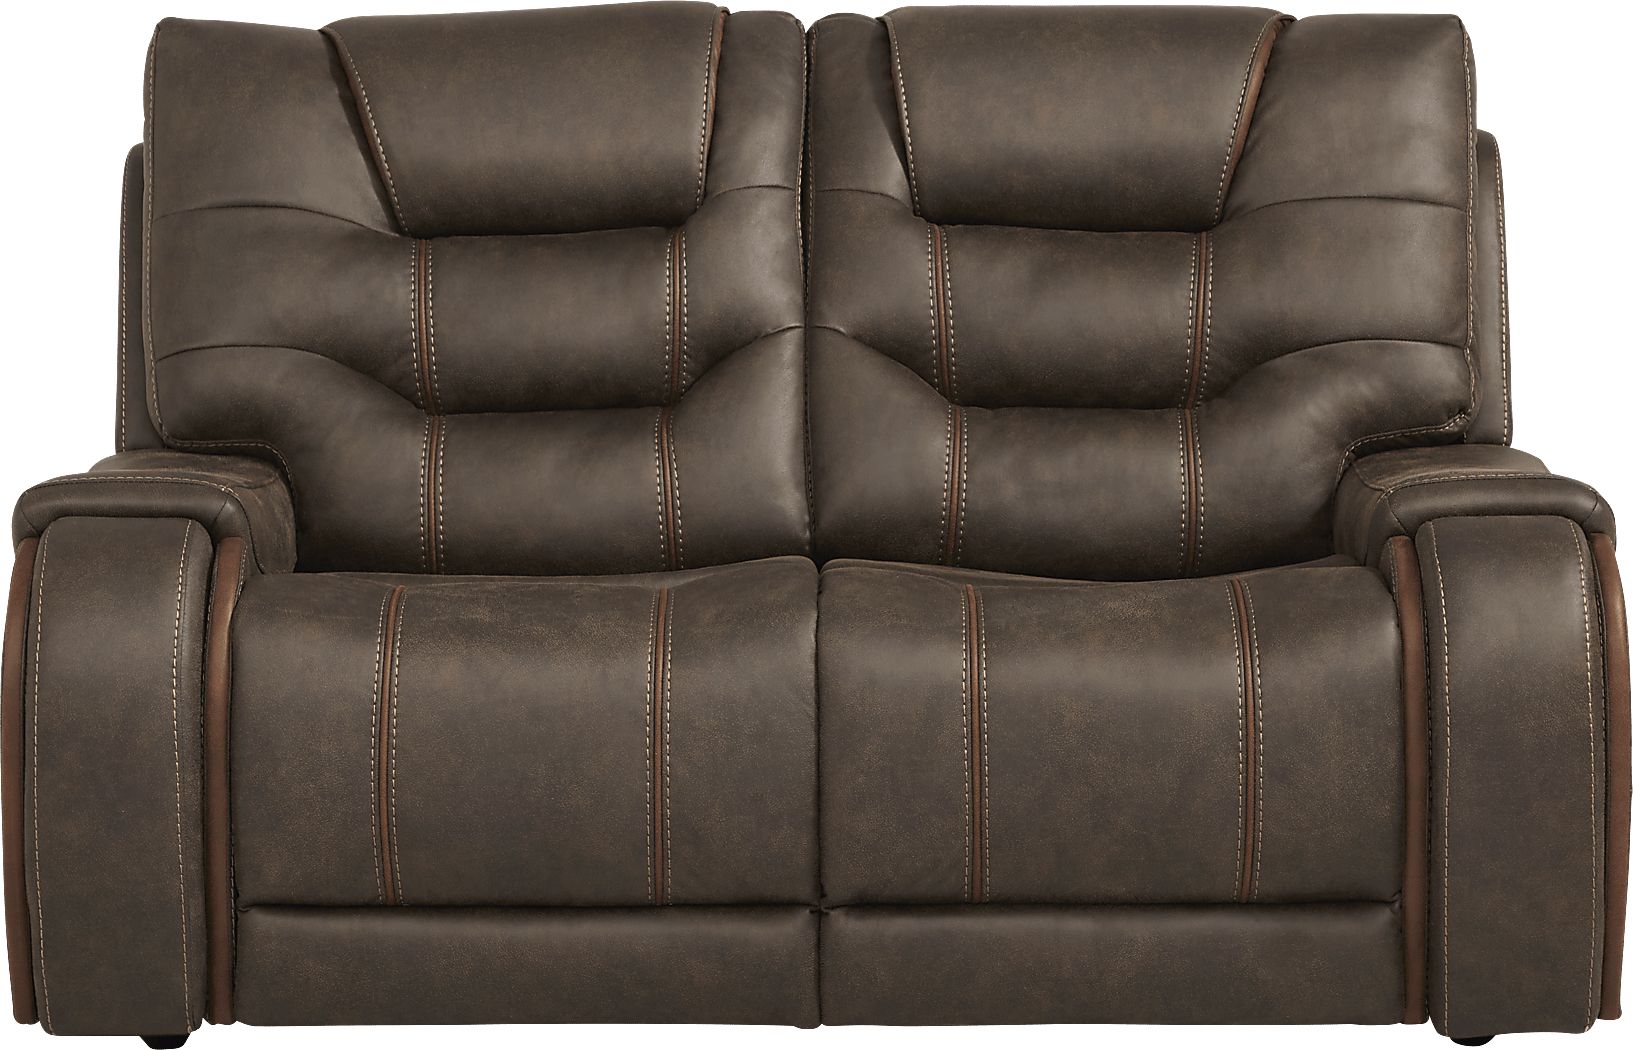 Laredo Springs Brown 5 Pc Living Room with Reclining Sofa